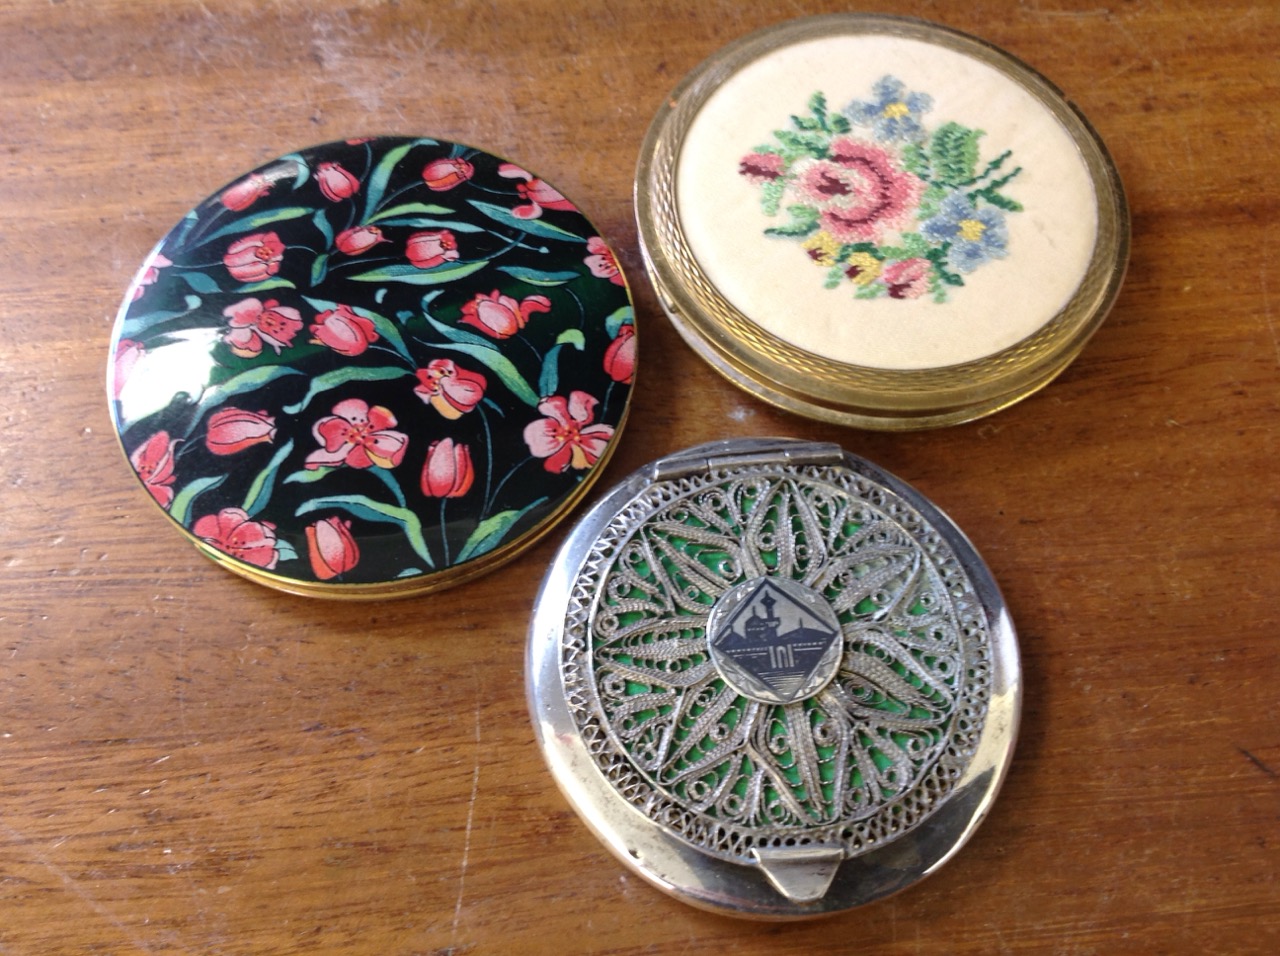 An Egyptian neilo inlaid silver metal compact with filligree lid; a cased Stratton floral enamelled